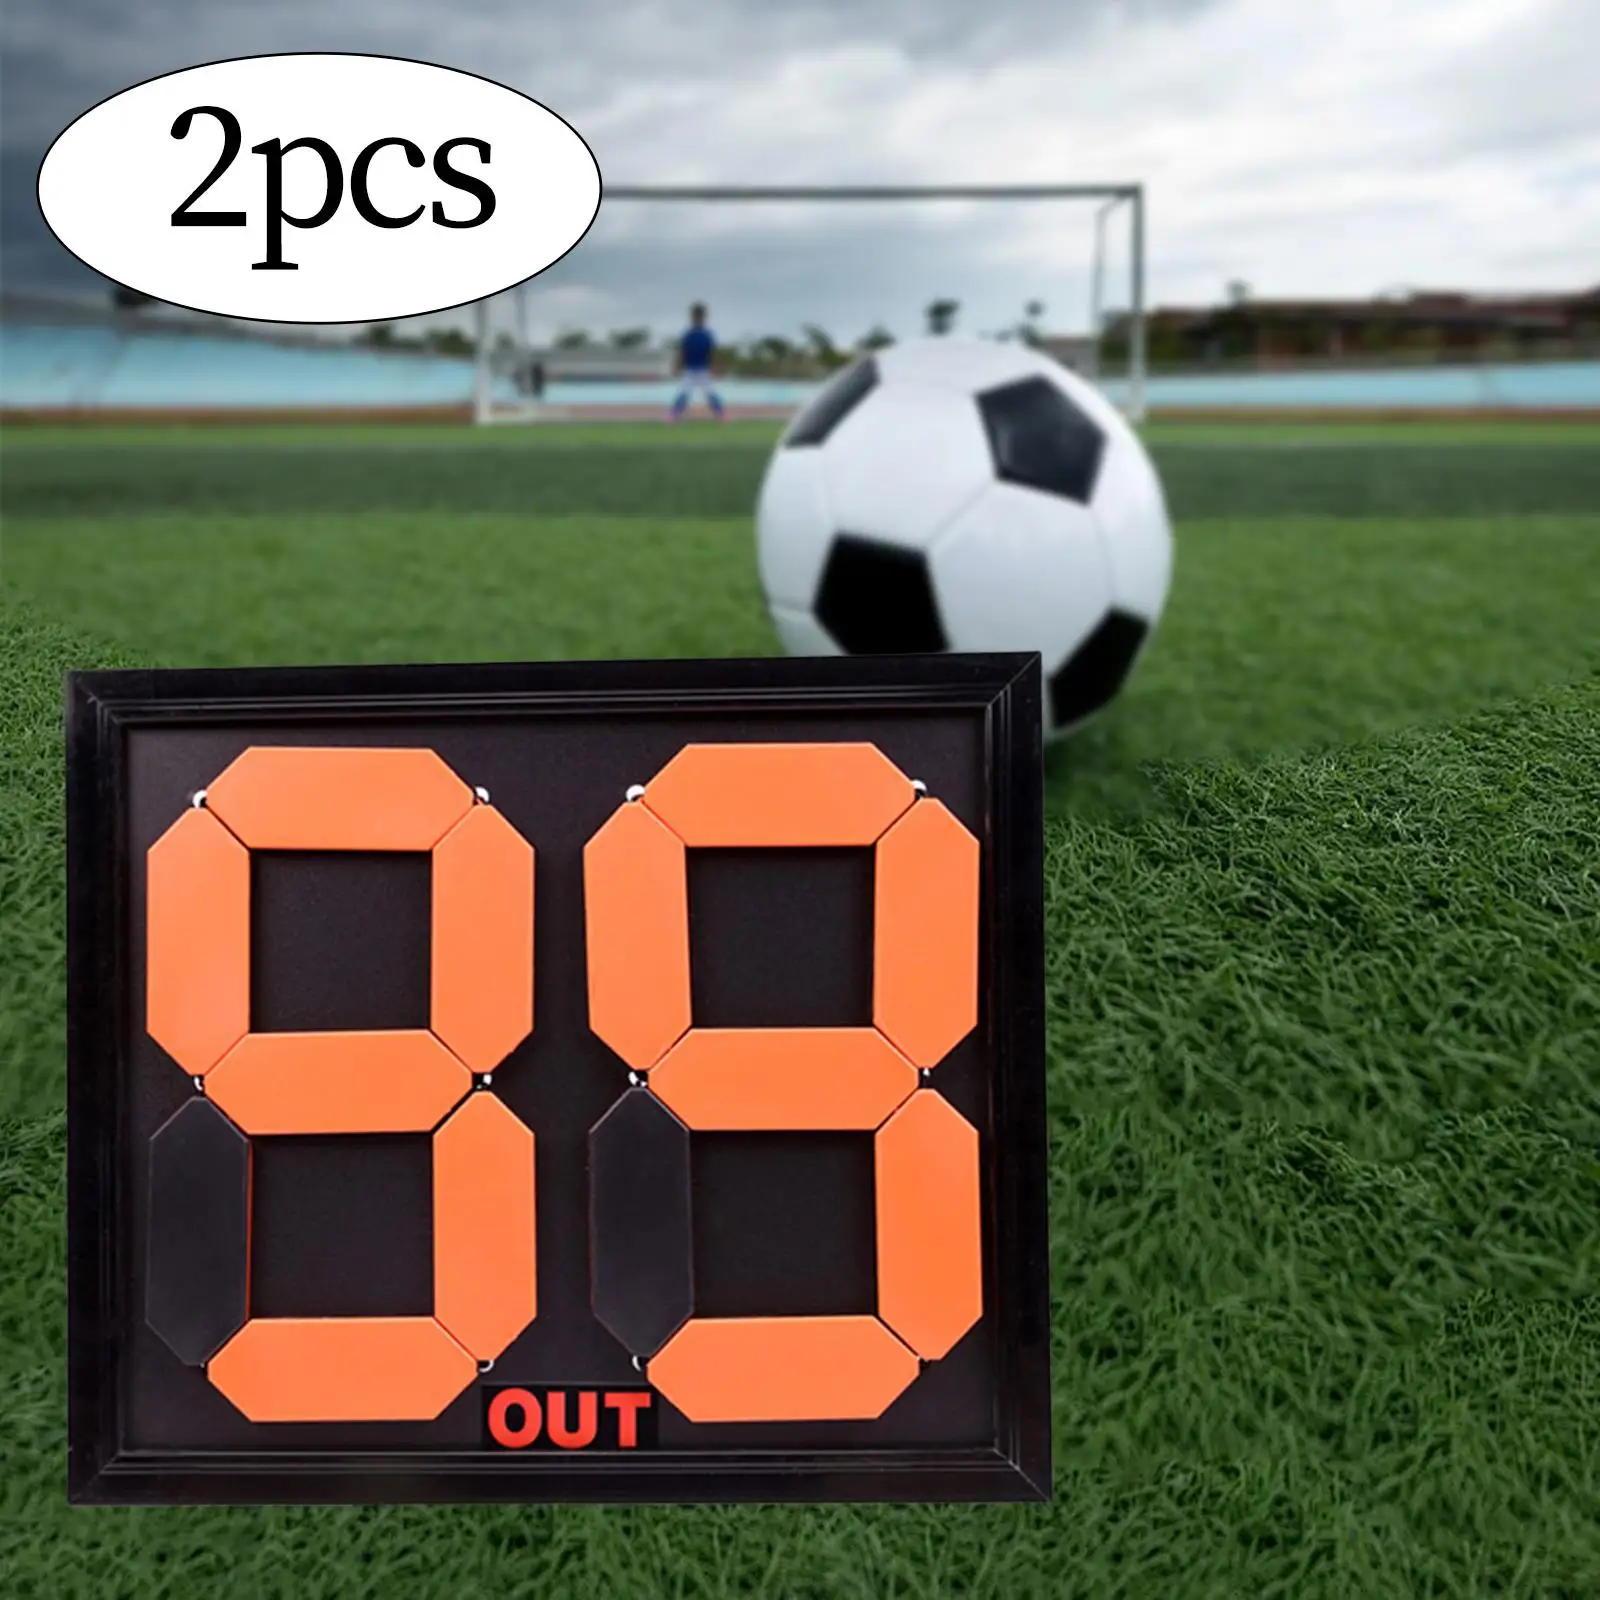 2Pcs Soccer Football Substitution Board Soccer Ball Bright Color Number Basketball Game Professional Durable Referee Scoreboard